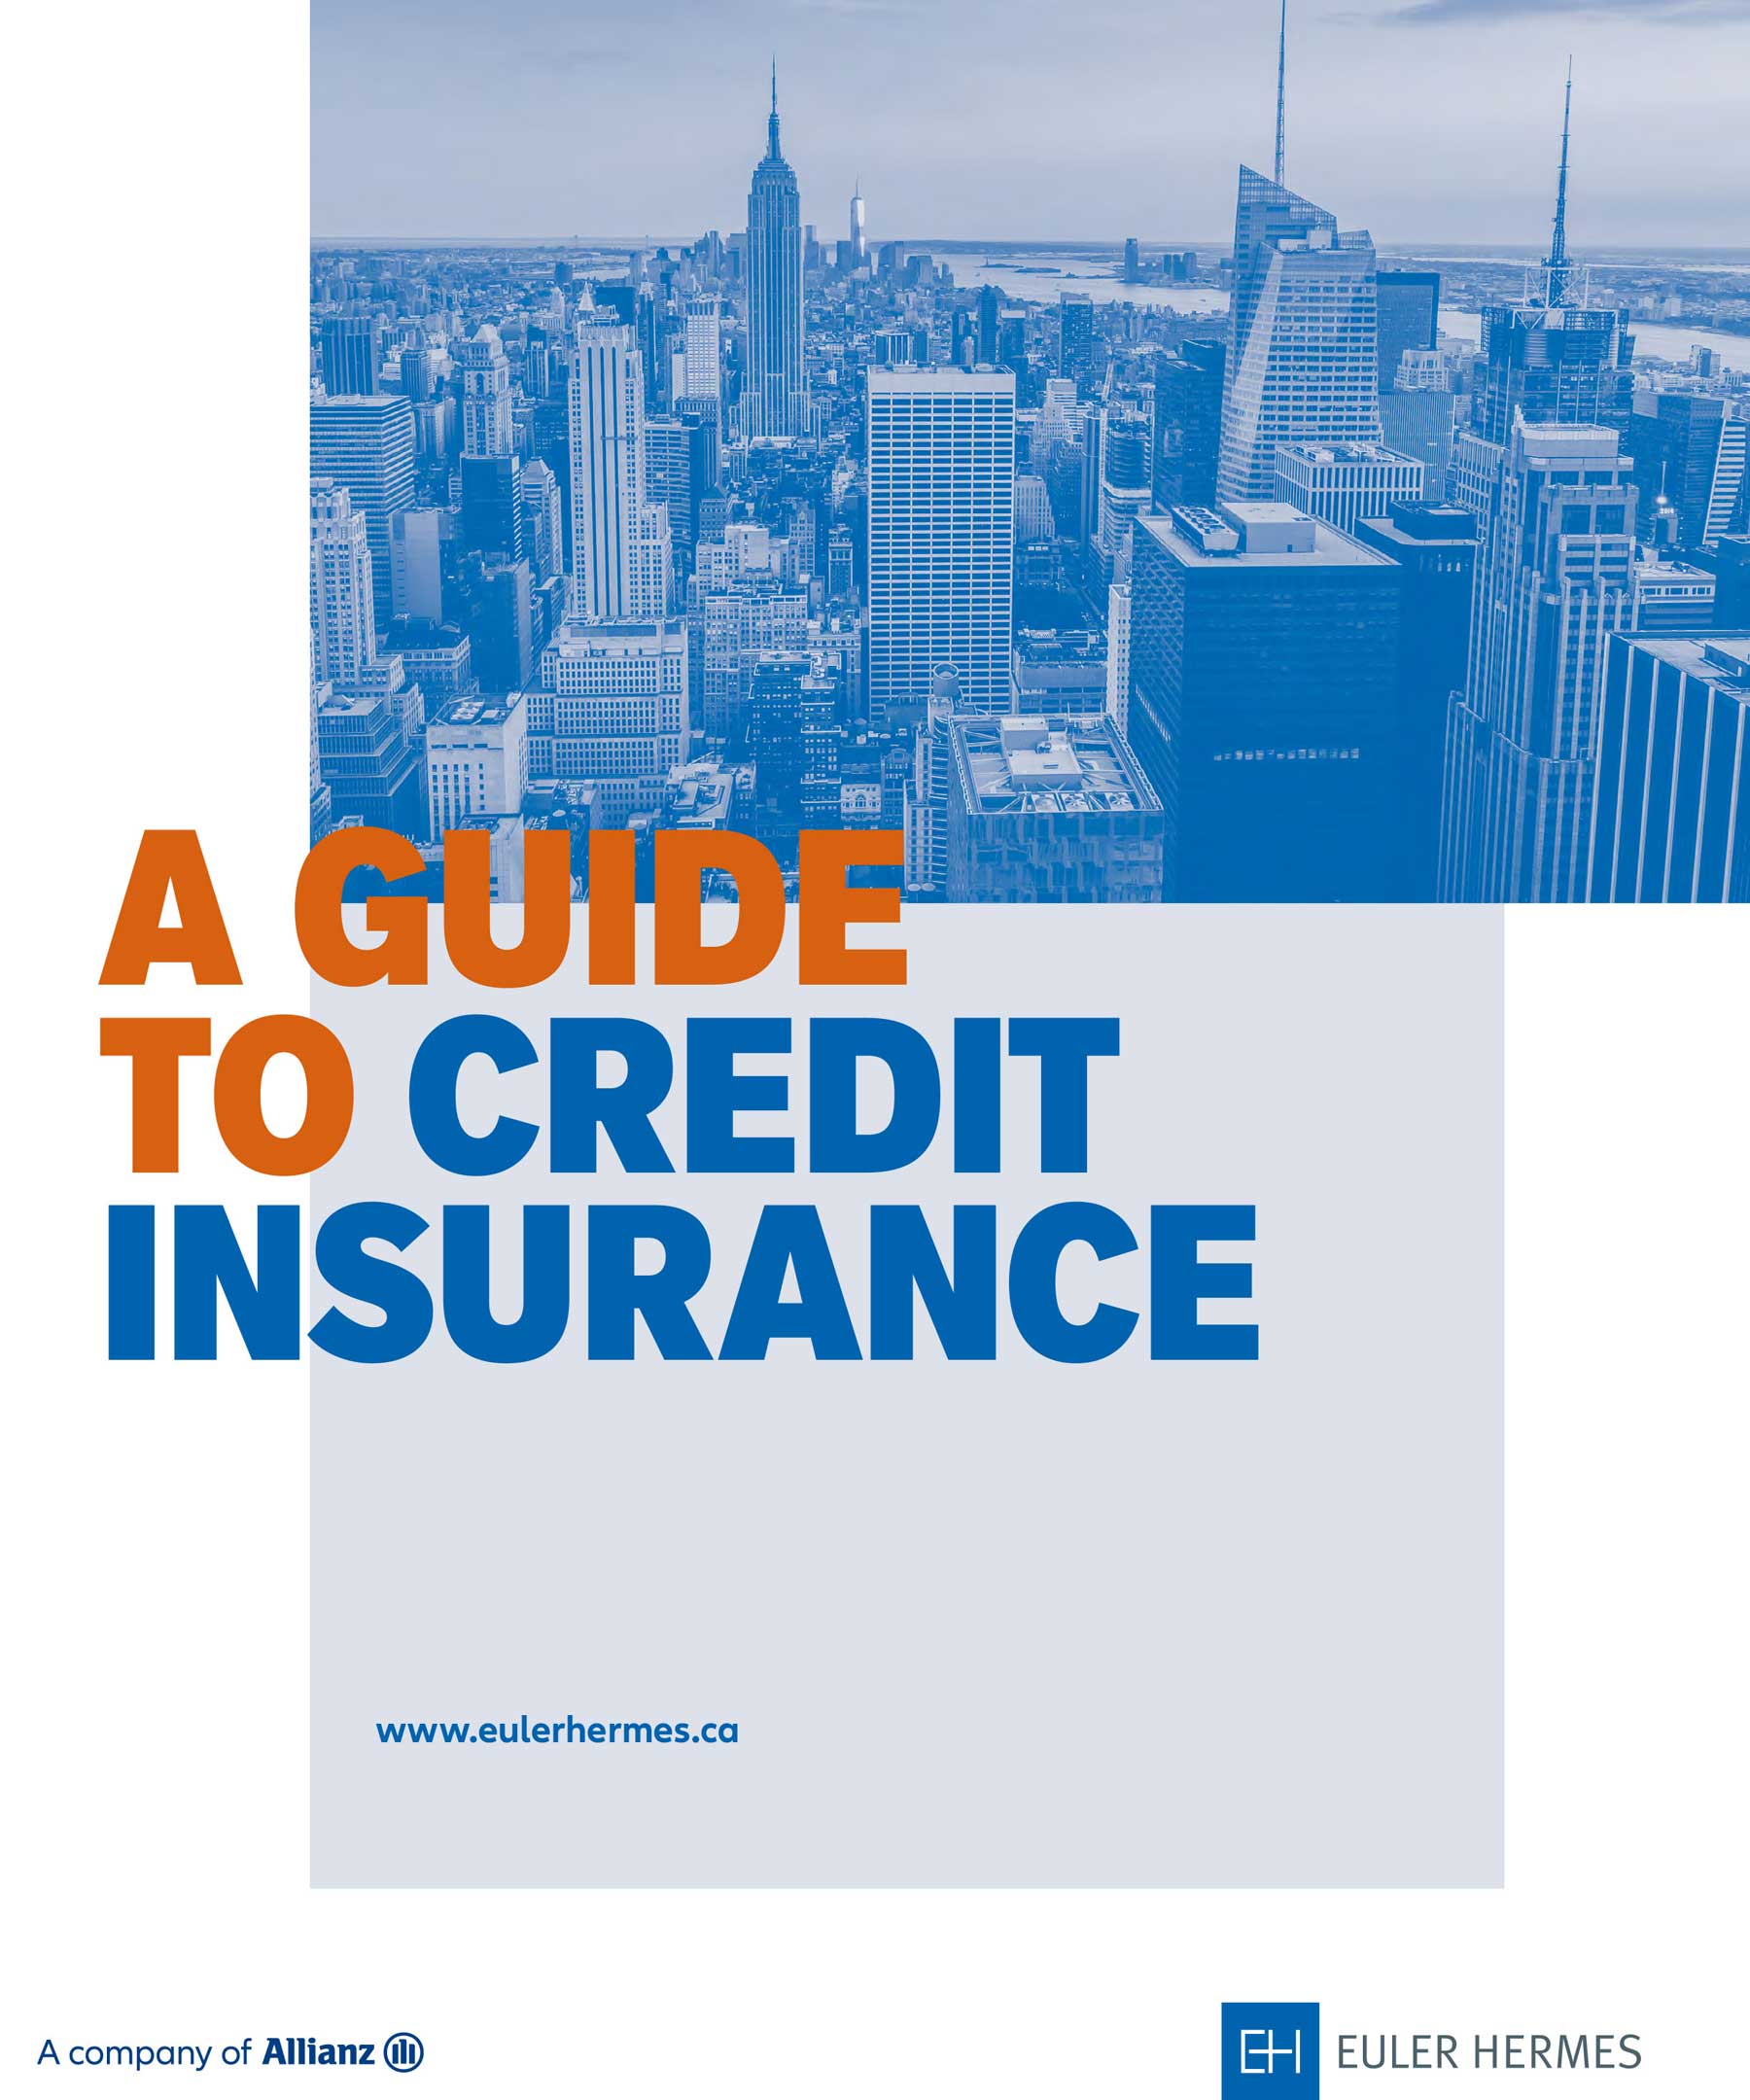 A guide to credit insurance